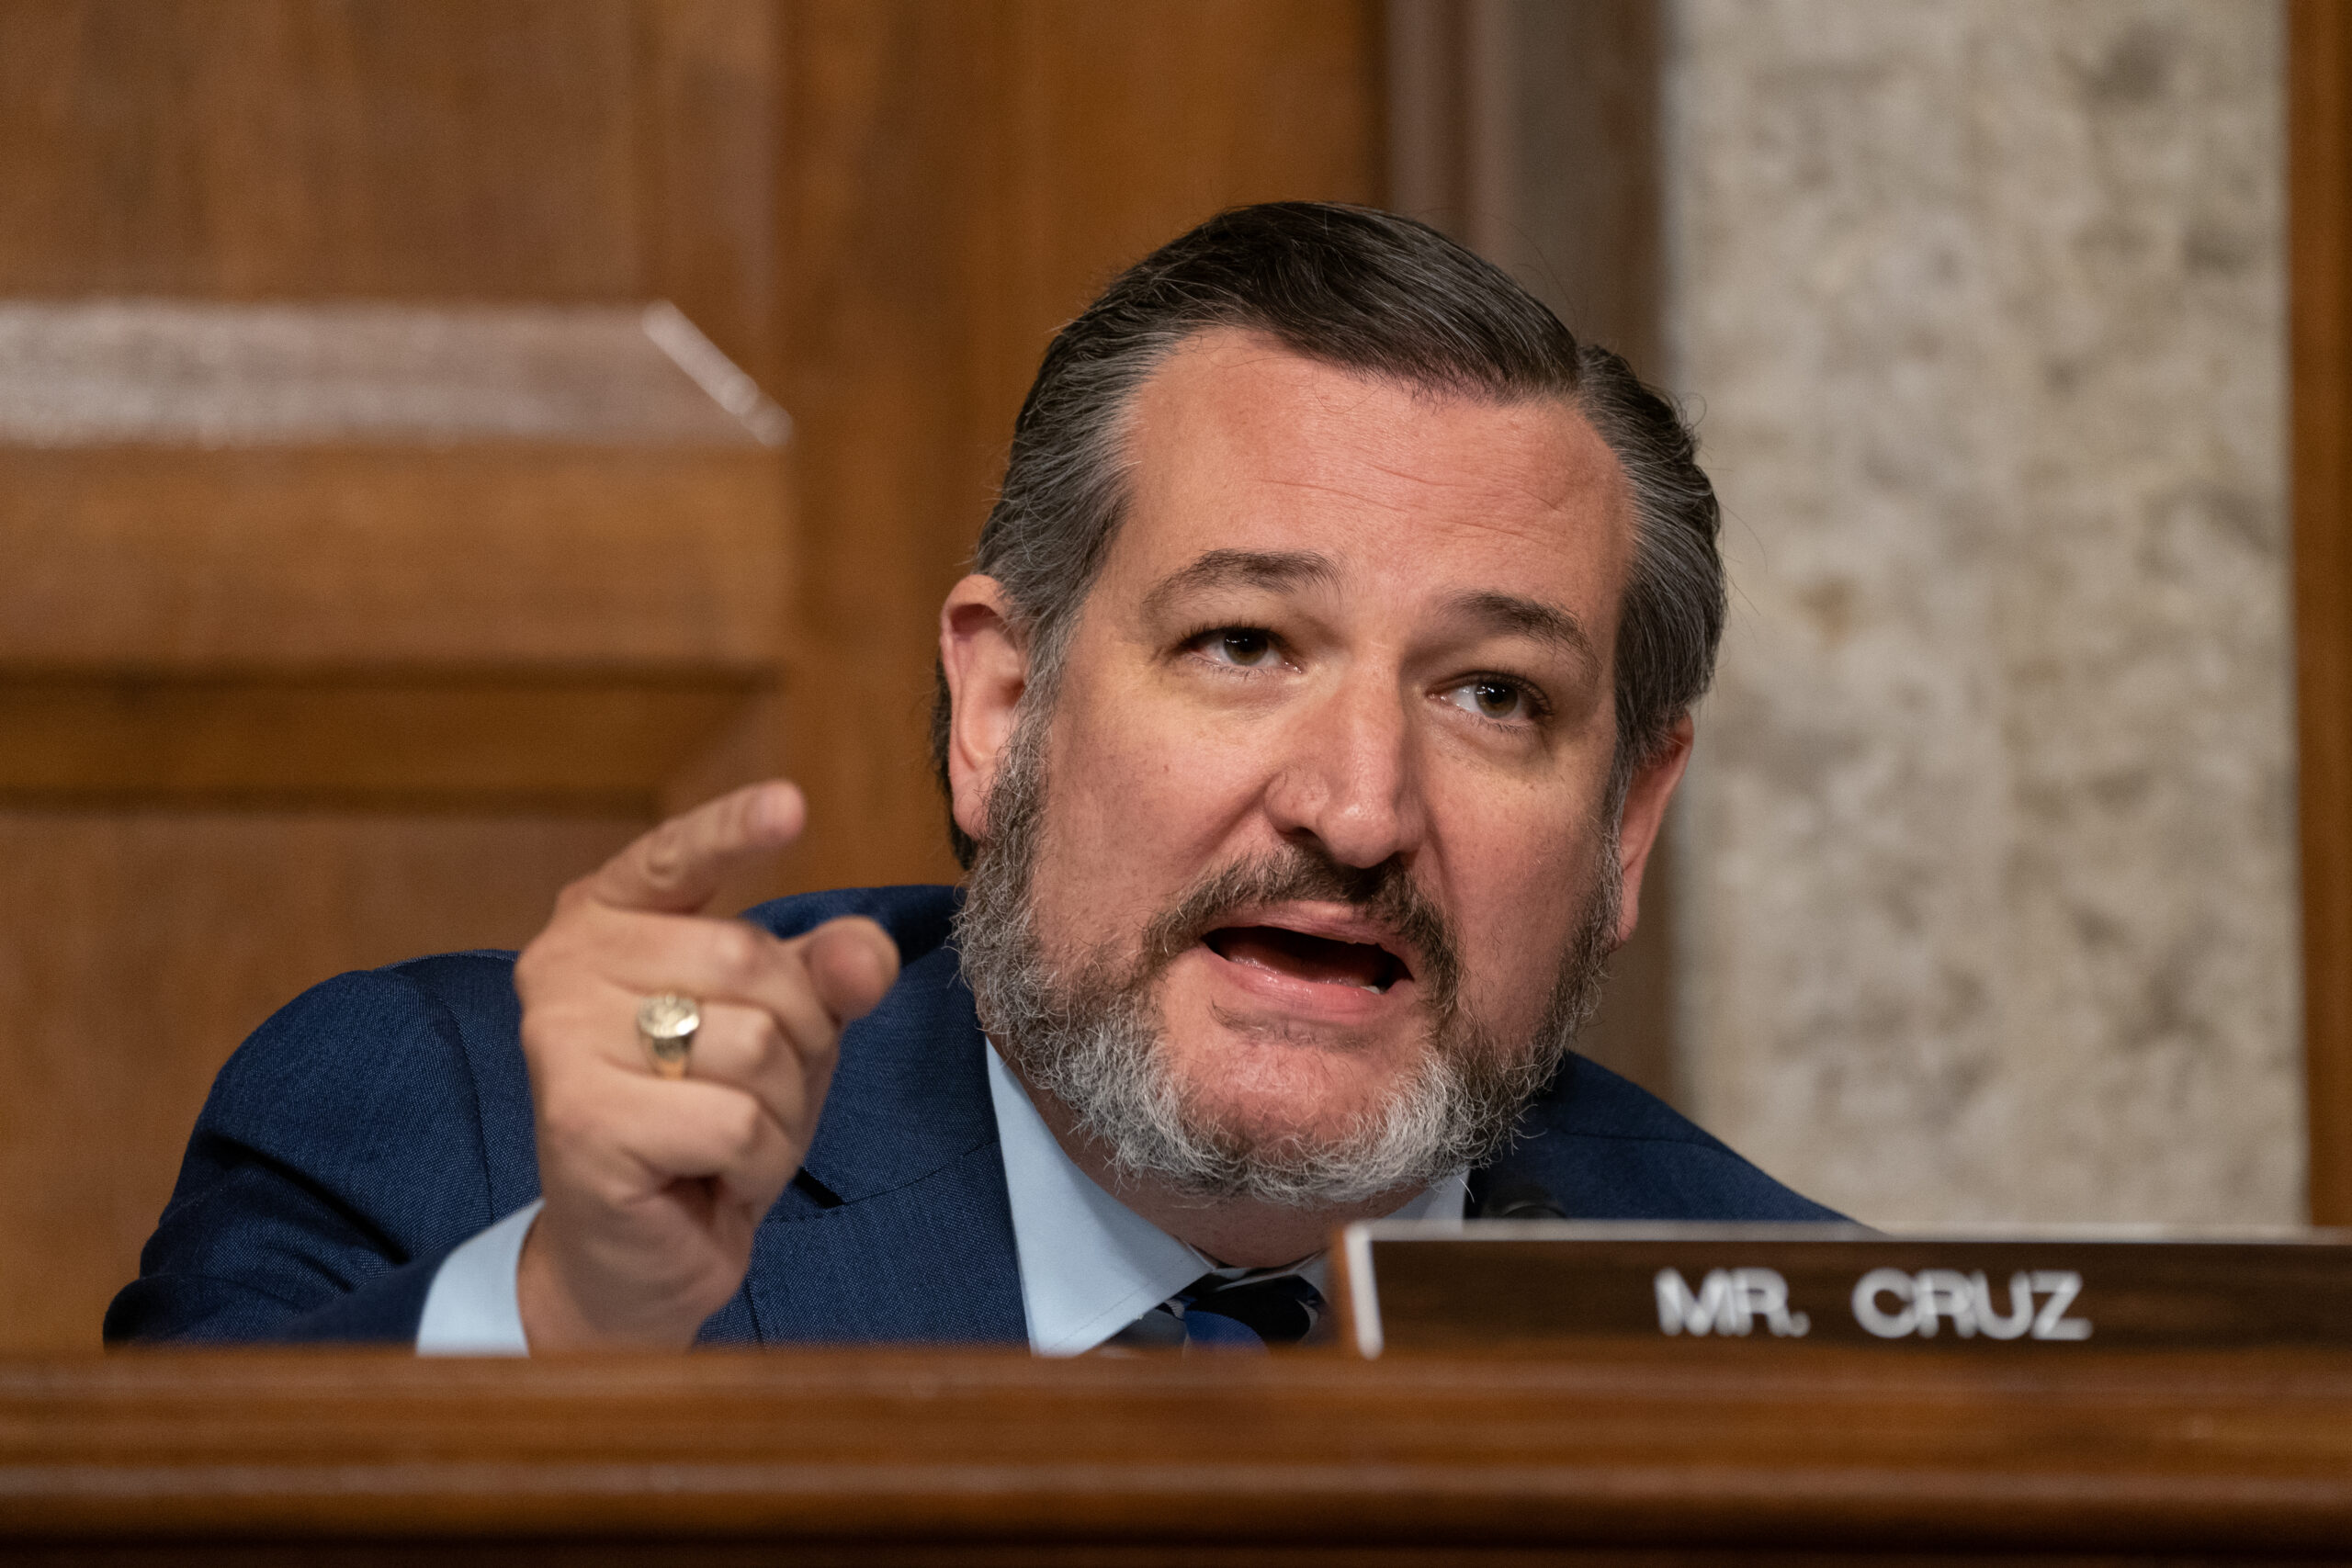 EXCLUSIVE: Cruz Accuses DOJ of 'Aggressively Targeting' Pro-Life Activists Who 'Blew the Whistle' on DC Abortionist